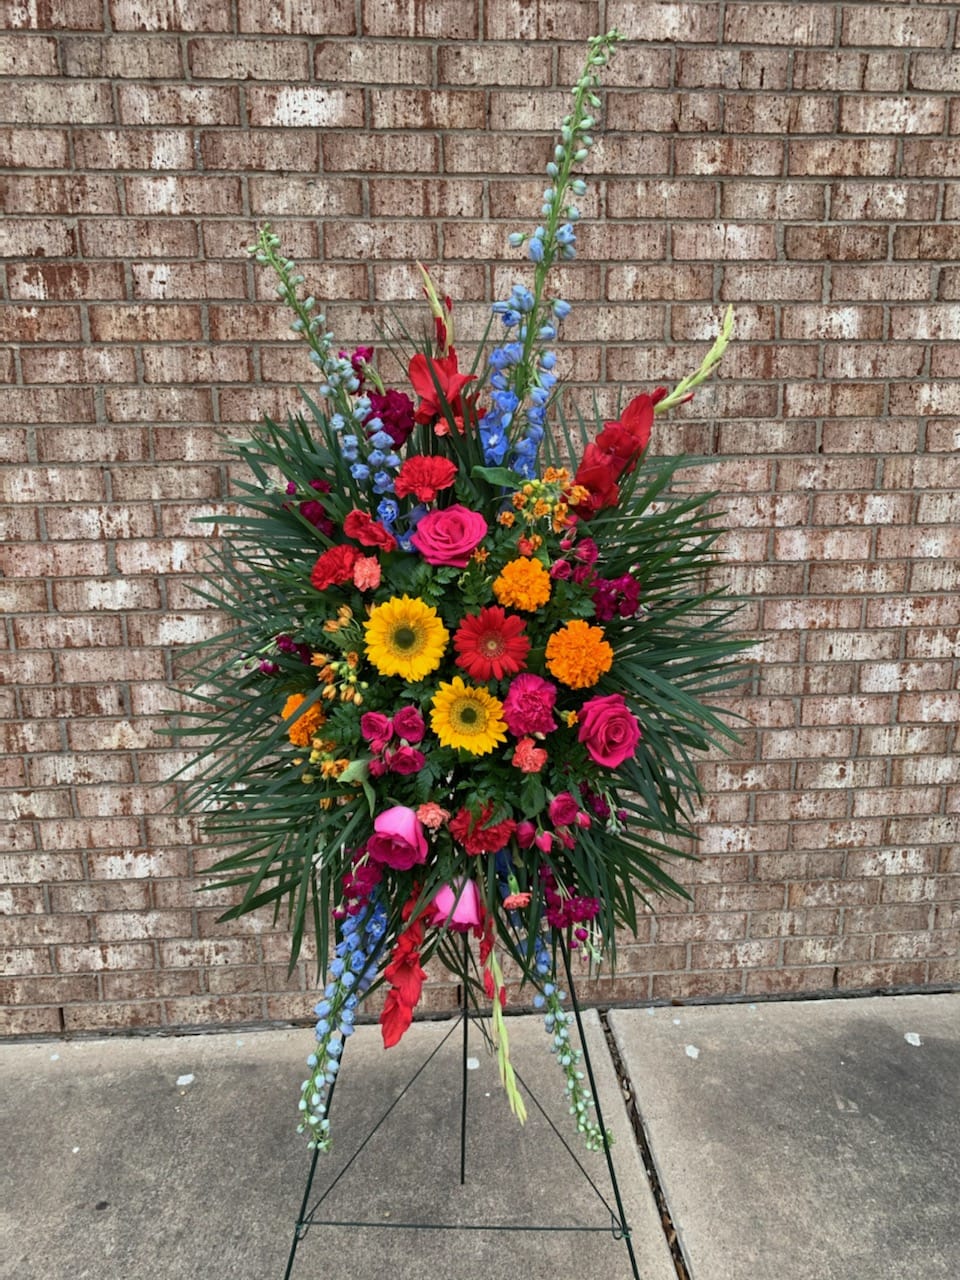 Celebration of Life standing spray - A standing spray that shows off every selection of the spectrum, with vibrant reds, oranges, yellows, blues, purples, and pinks with foliage accents atop an easel. A colorful combo of gladiolus, gerbera daisies, delphinium, roses, stock, and carnations, this mix is the ideal way to pay thoughtful tribute to a loved one who brings bright memories of cheer and happiness to mind.